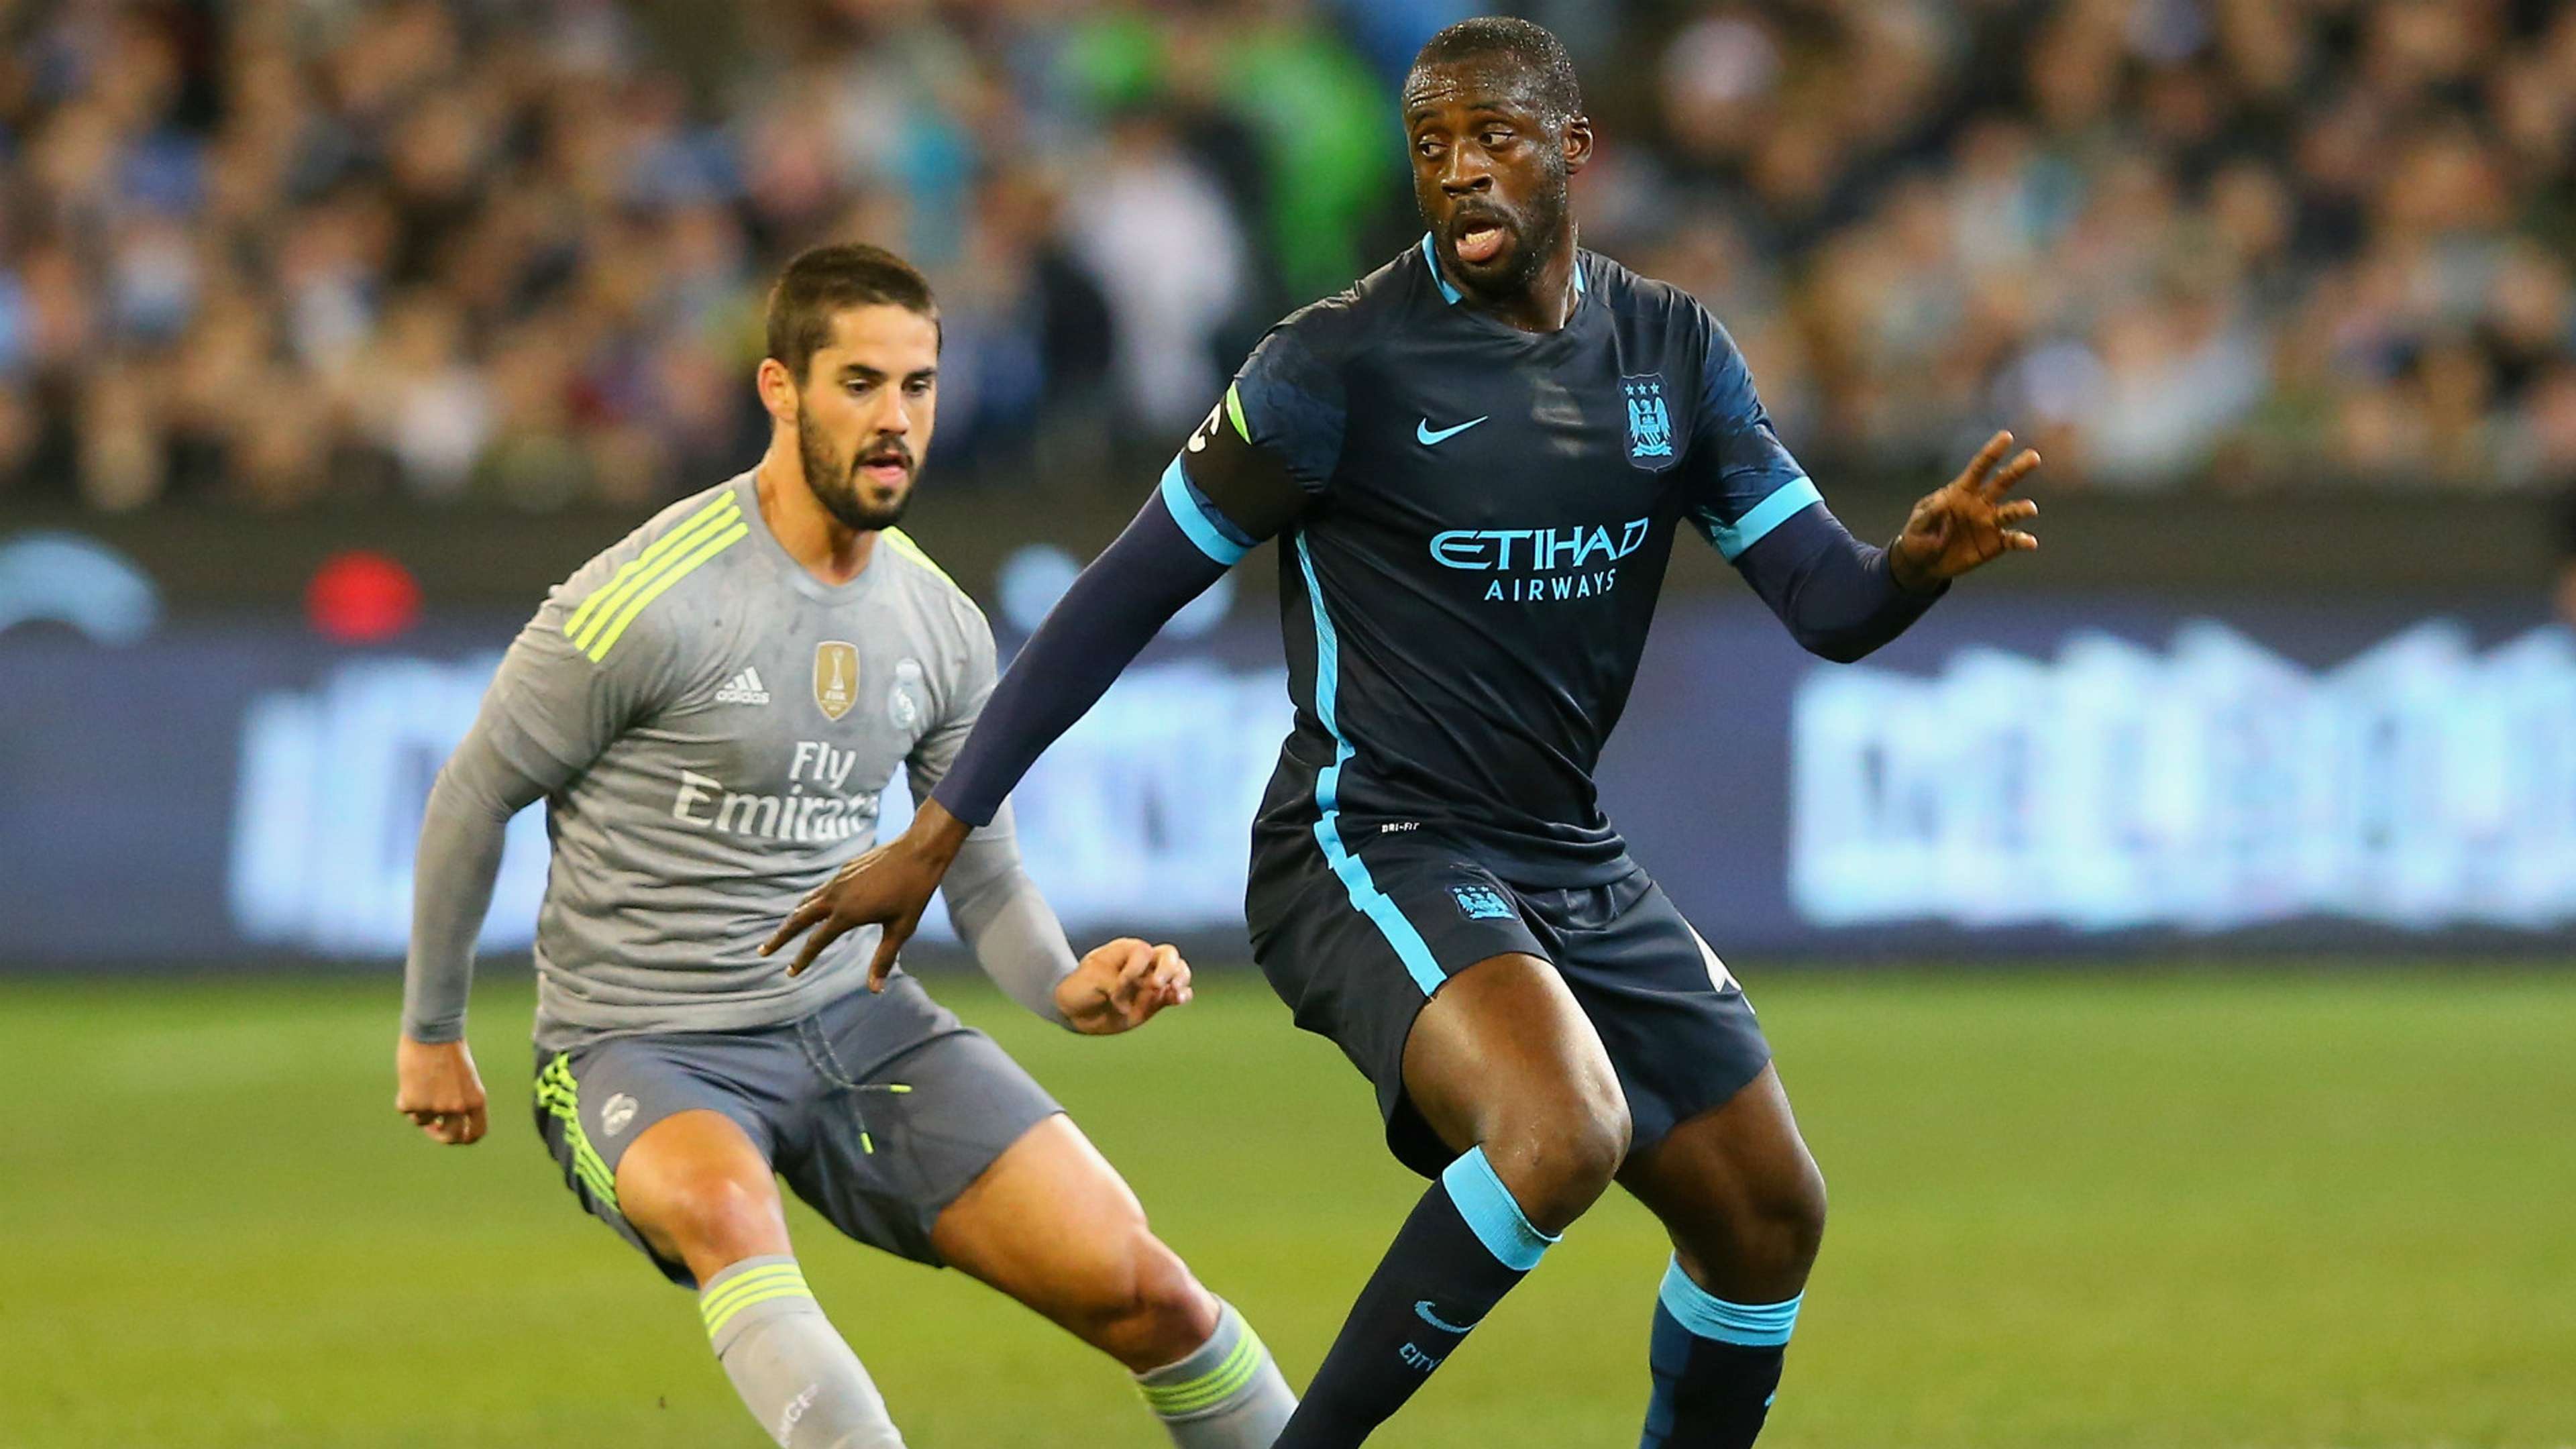 TOURE YAYA ISCO REAL MADRID MANCHESTER CITY FRIENDLY MELBOURNE 07242015